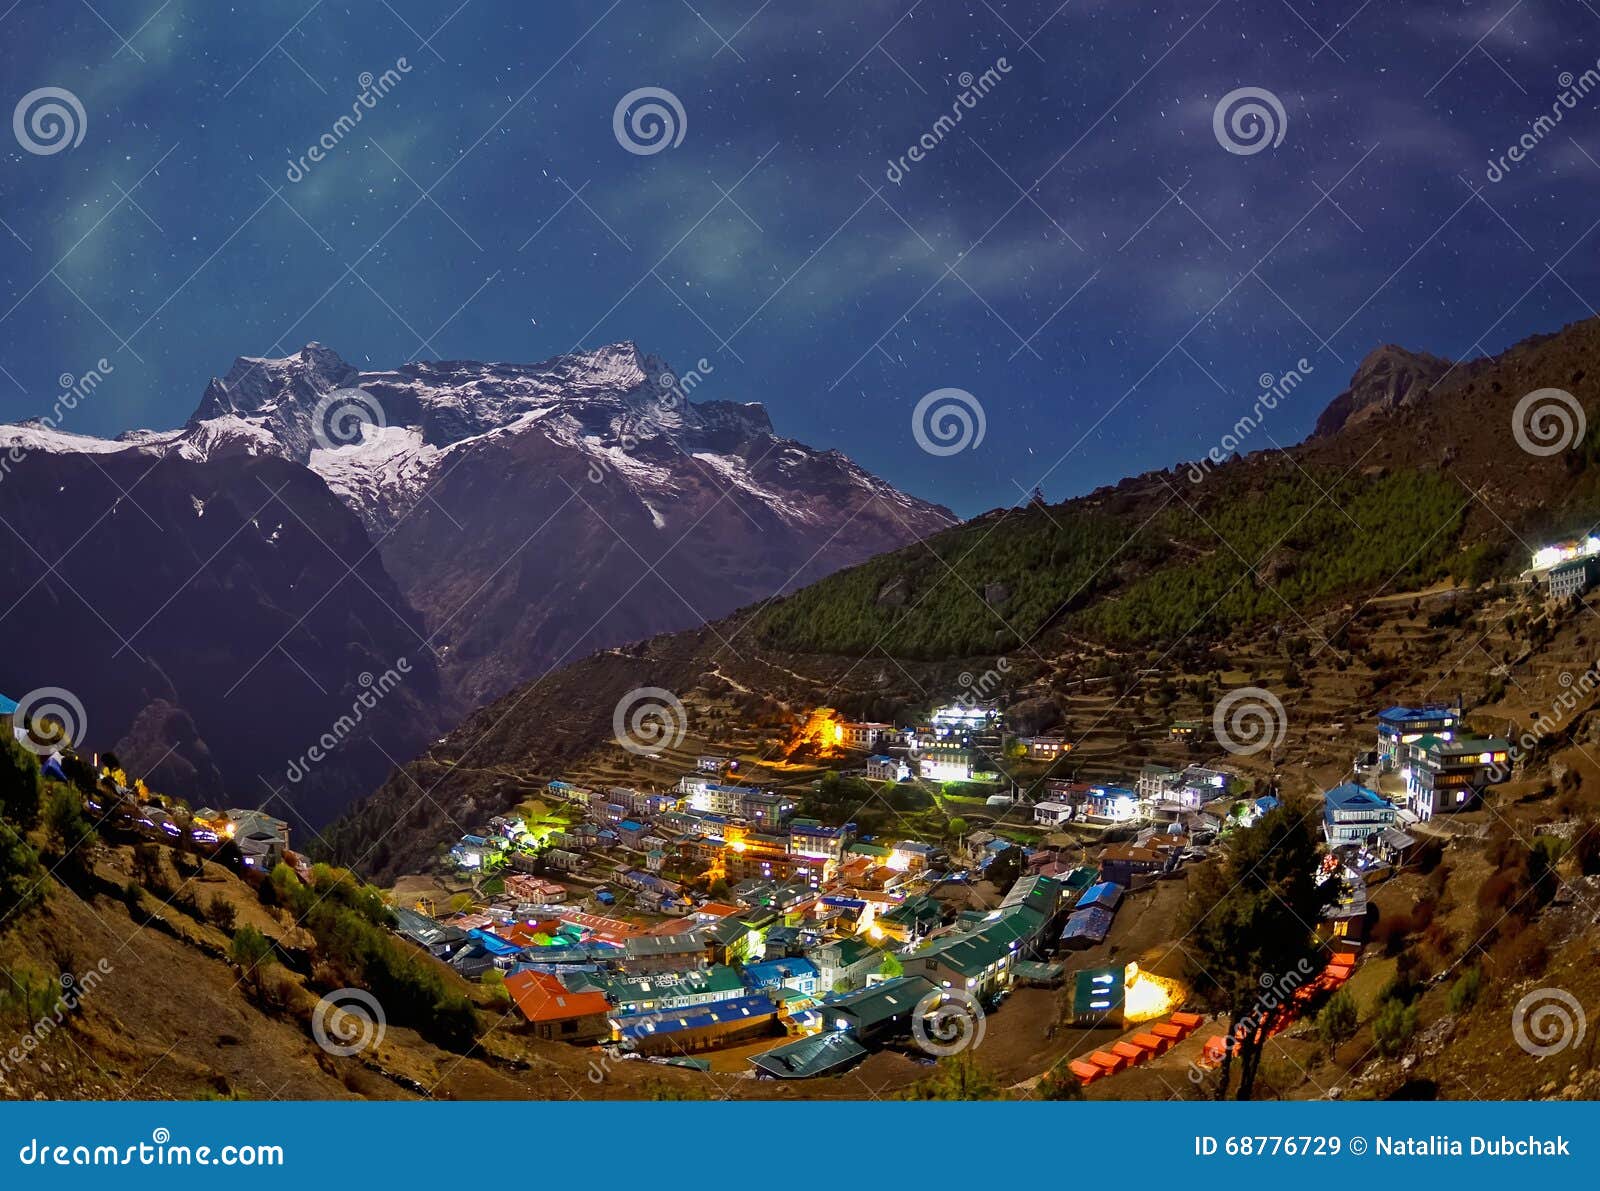 night view to the namche bazar, nepal